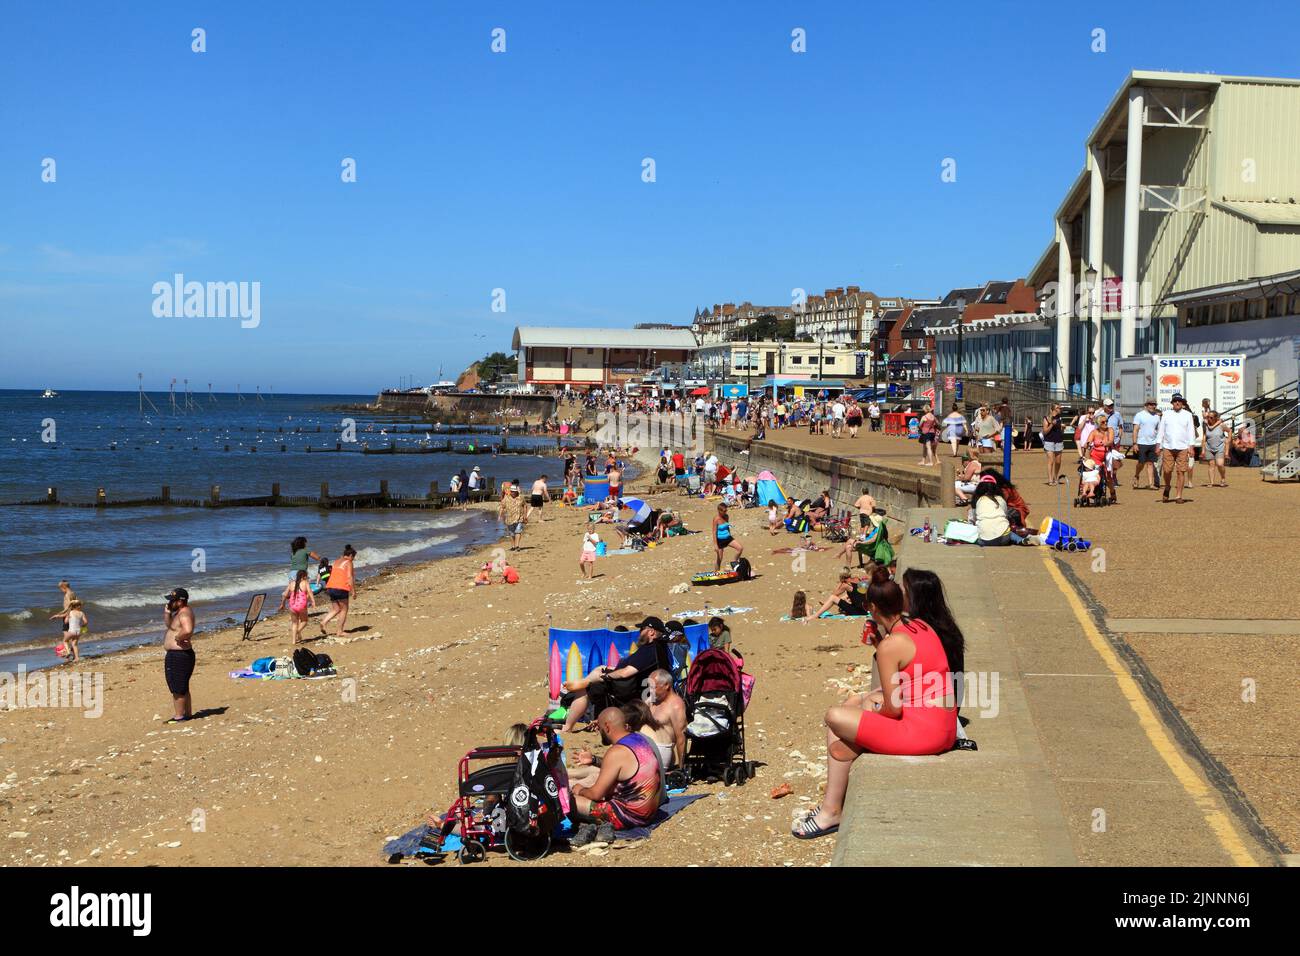 Promenade, Beach, high Tide, Hunstanton town, holidaymakers, visitors, Norfolk, England Stock Photo